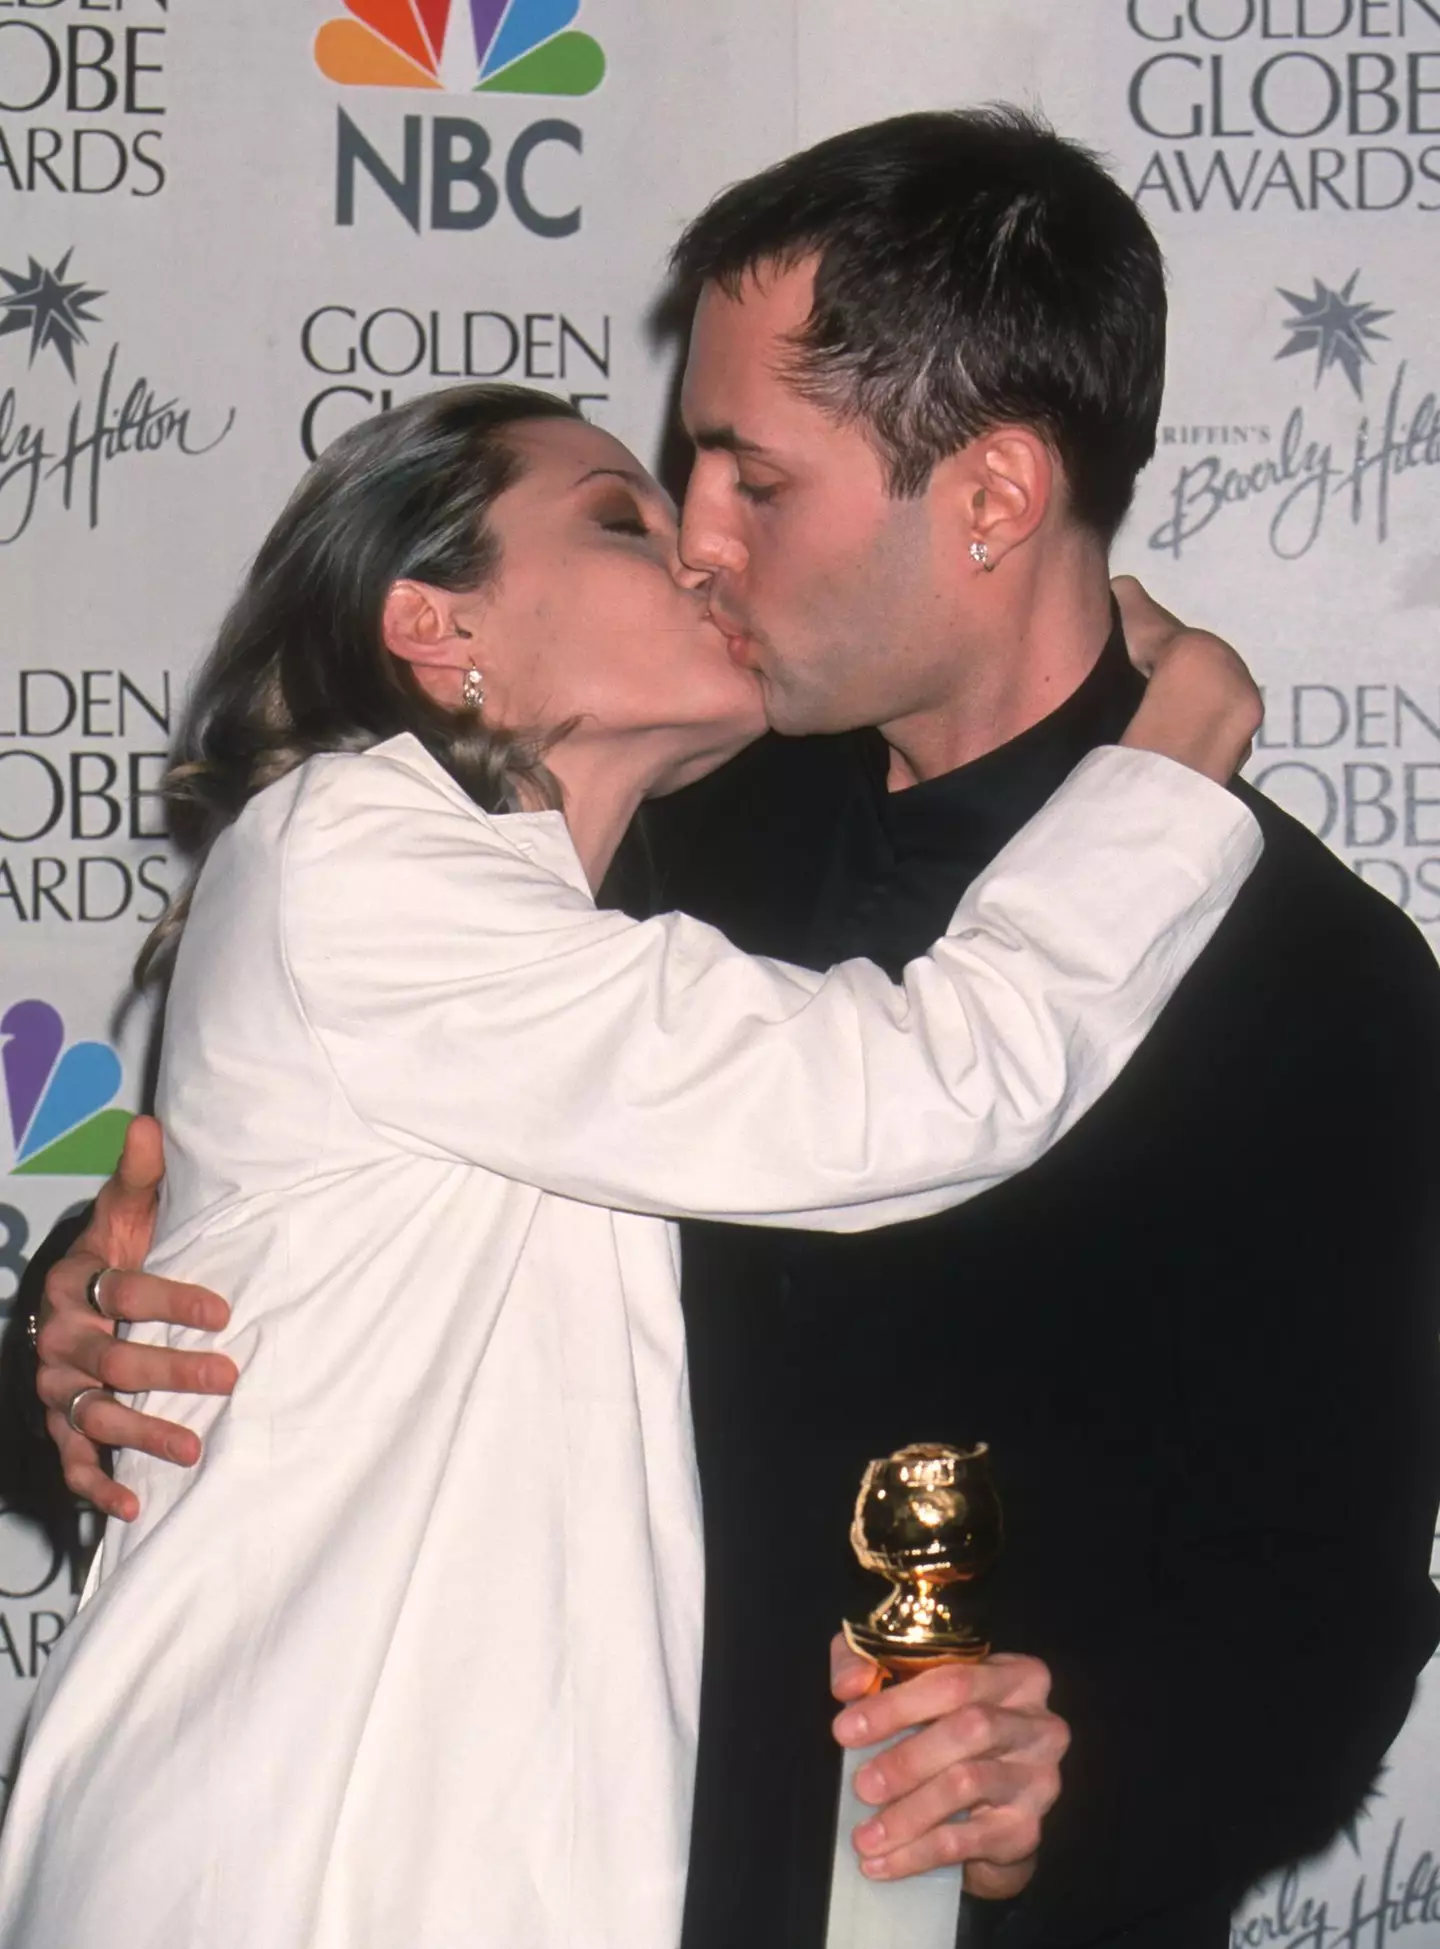 She also smooched him at the Golden Globes the same year.